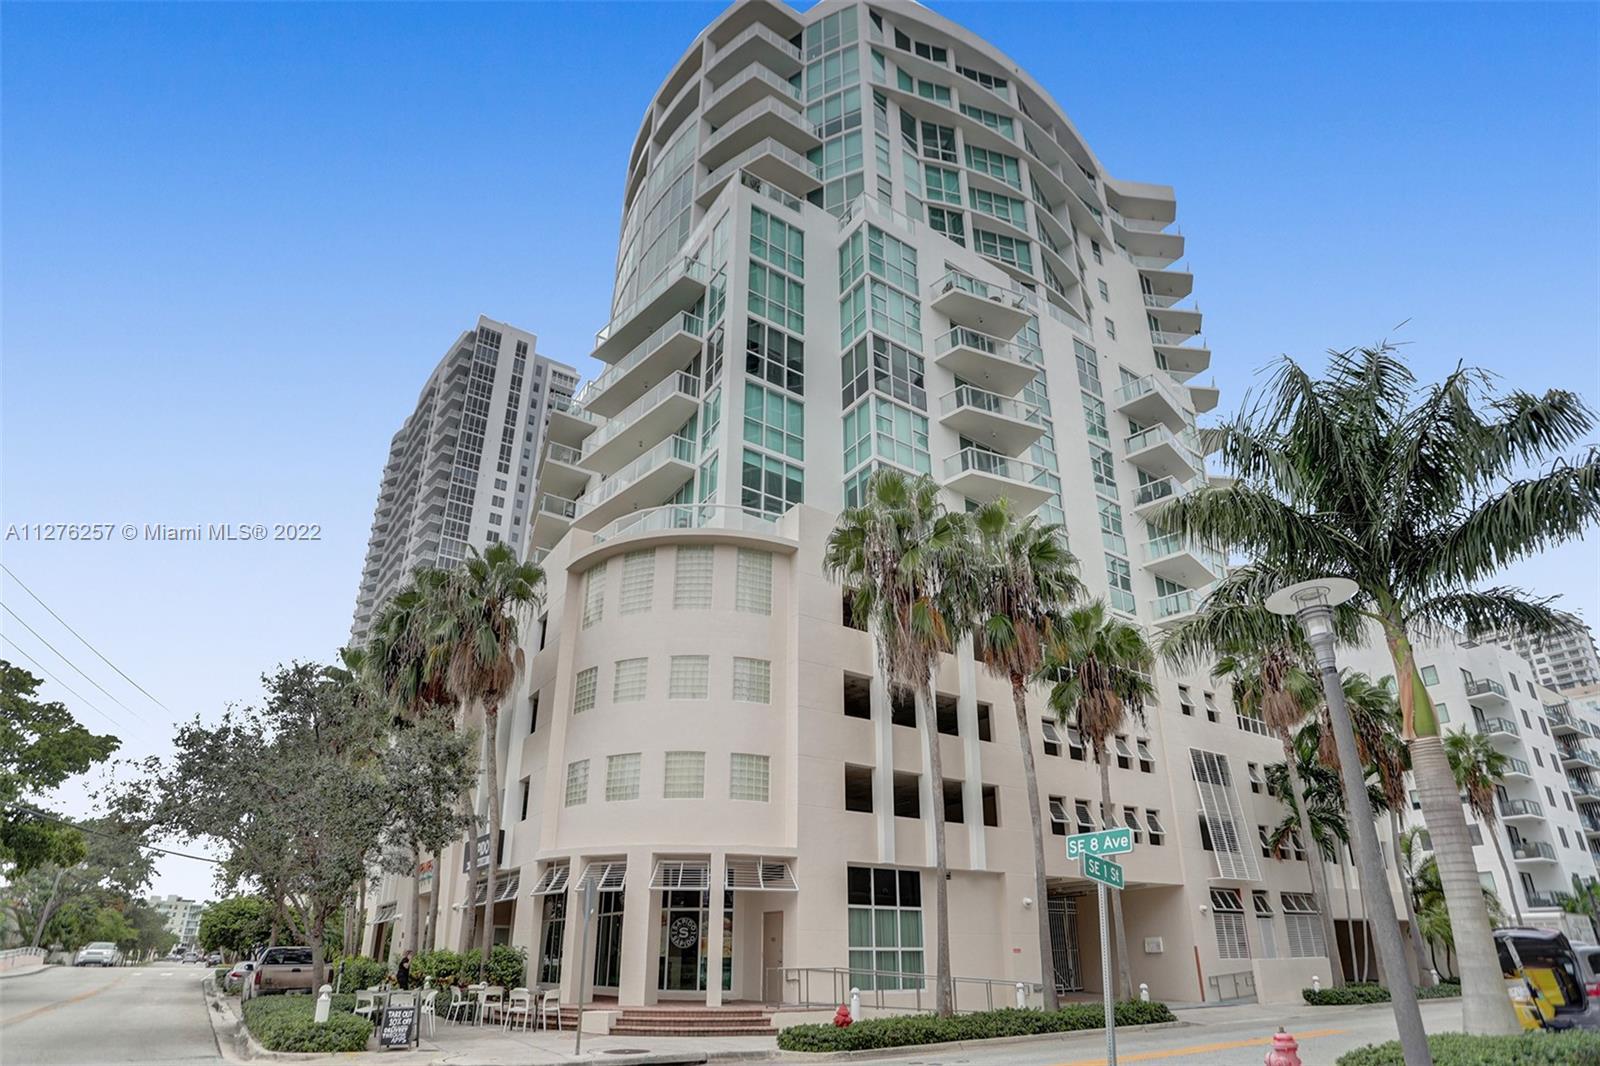 South Florida Living at its Finest! This Light & Bright 2Bed/2FullBath Condo is Move-In Ready... or 